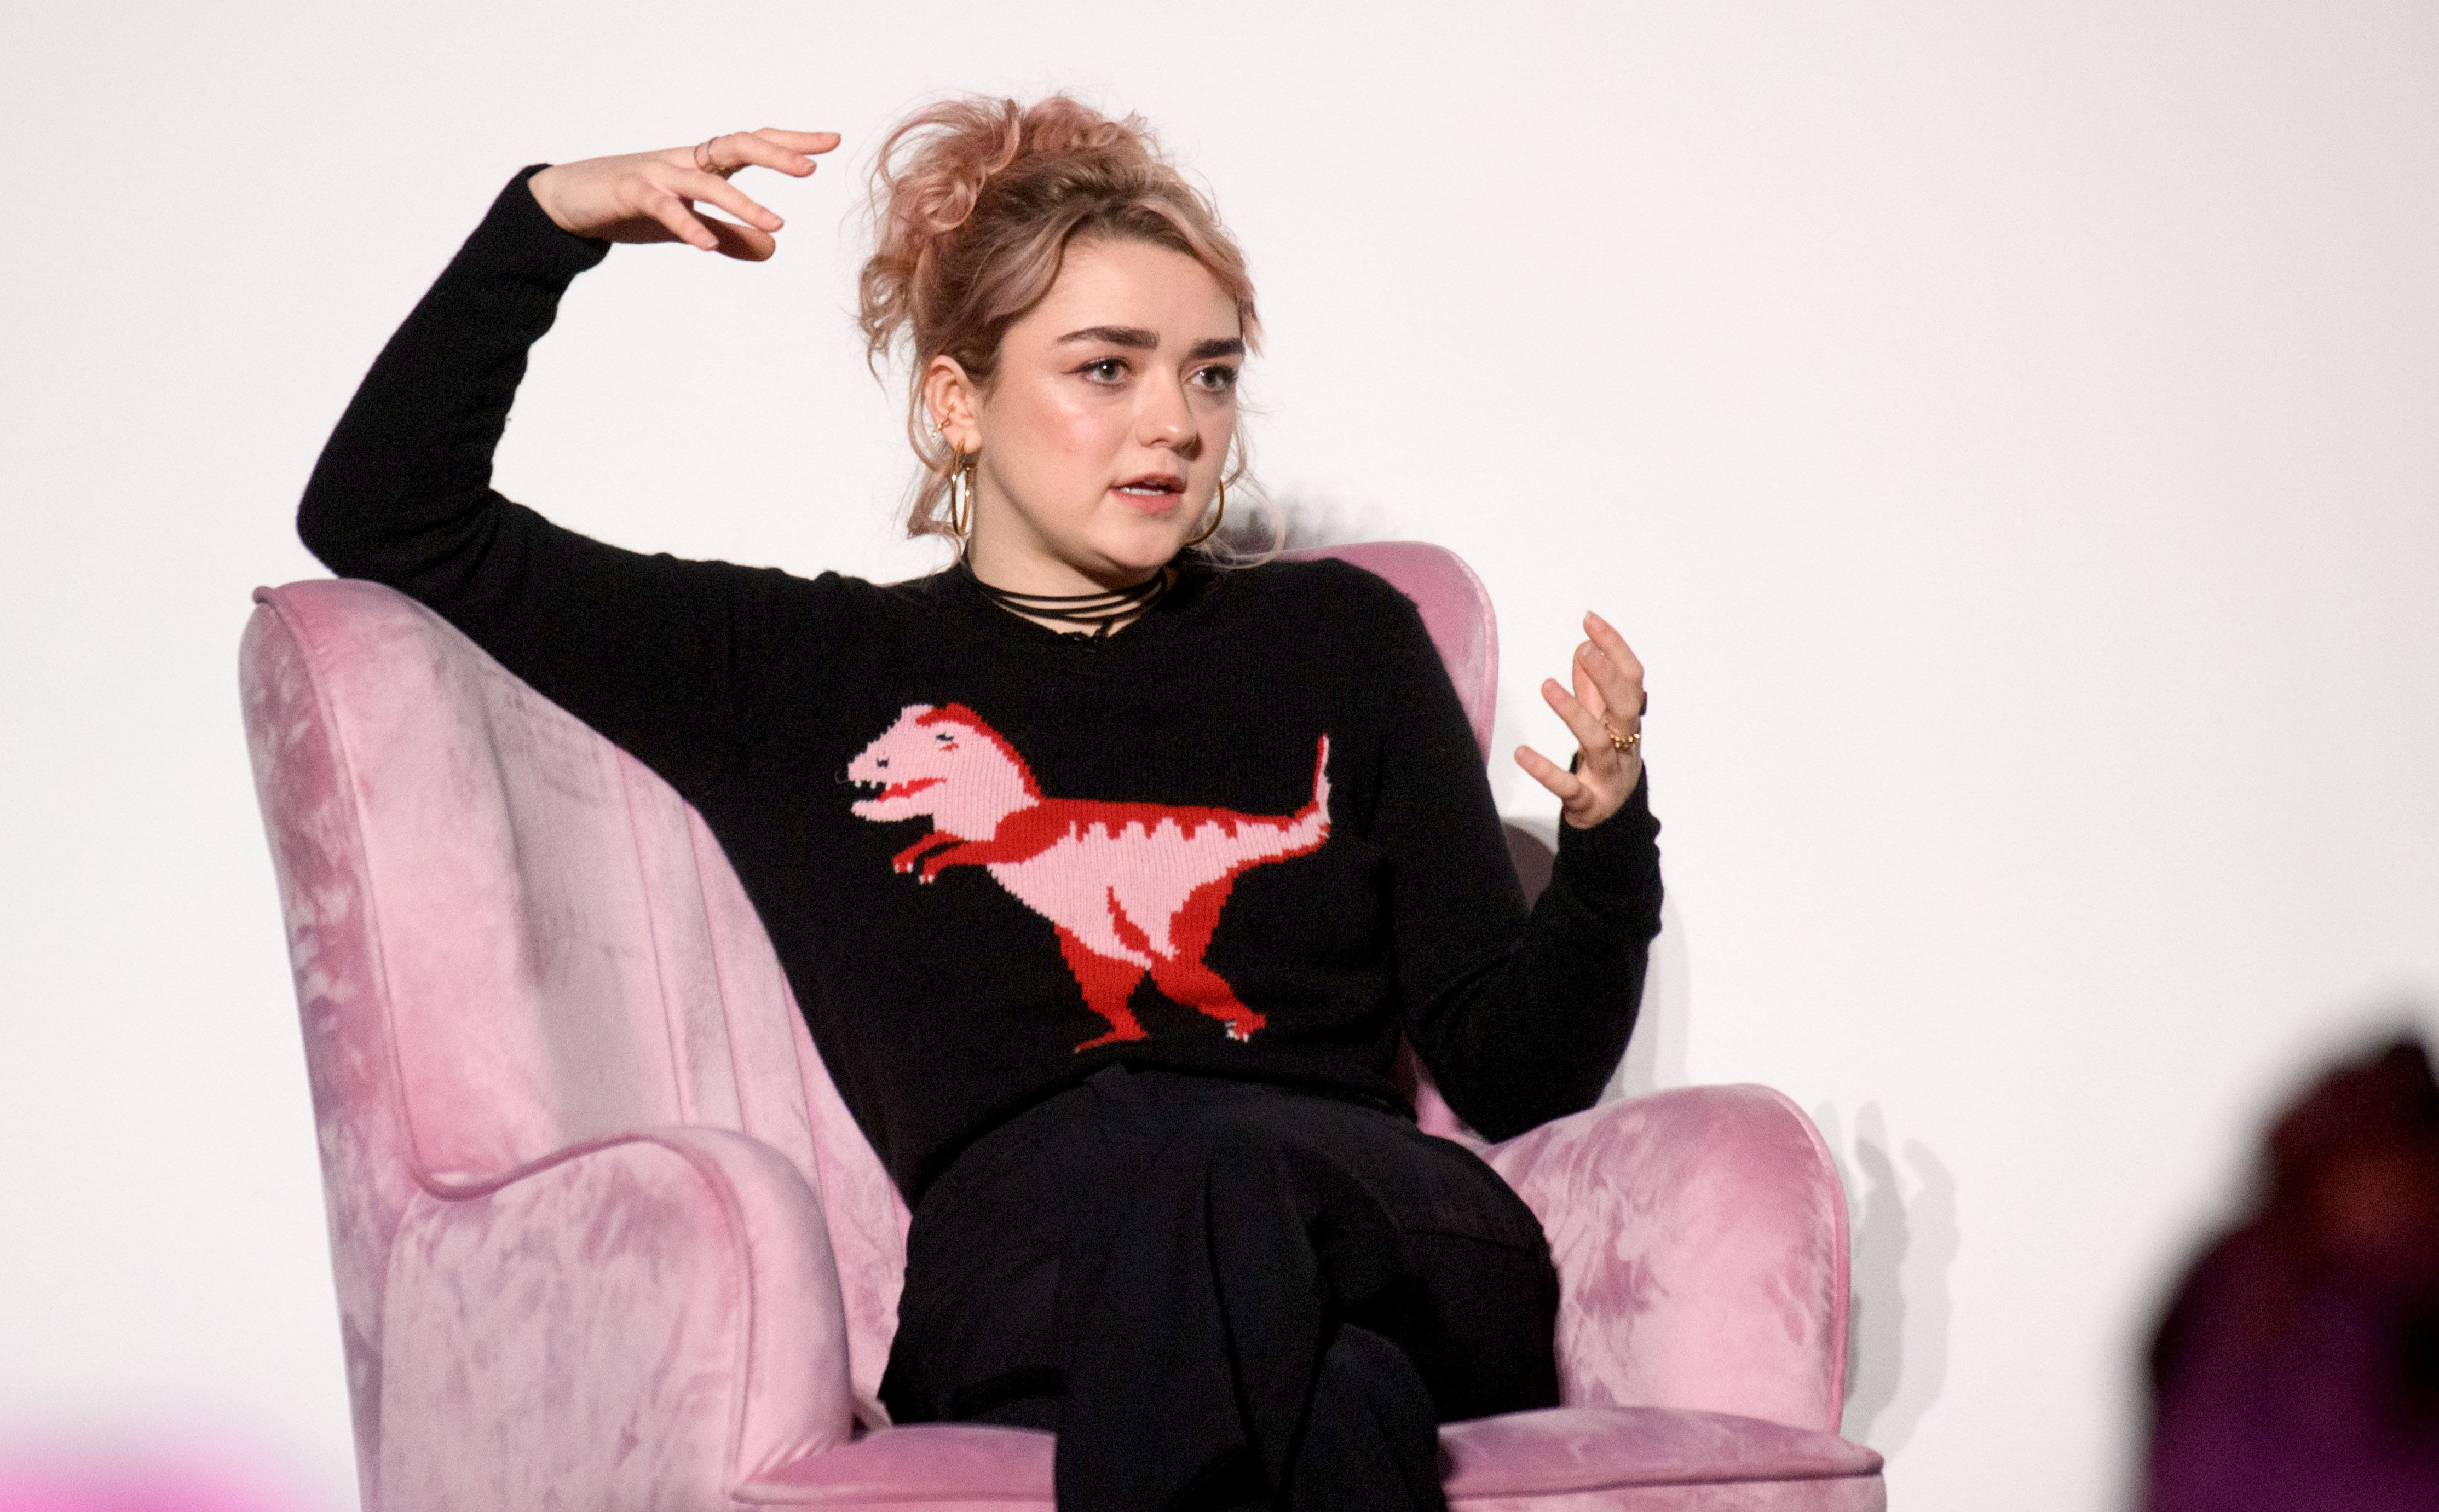 Maisie Star Sessions